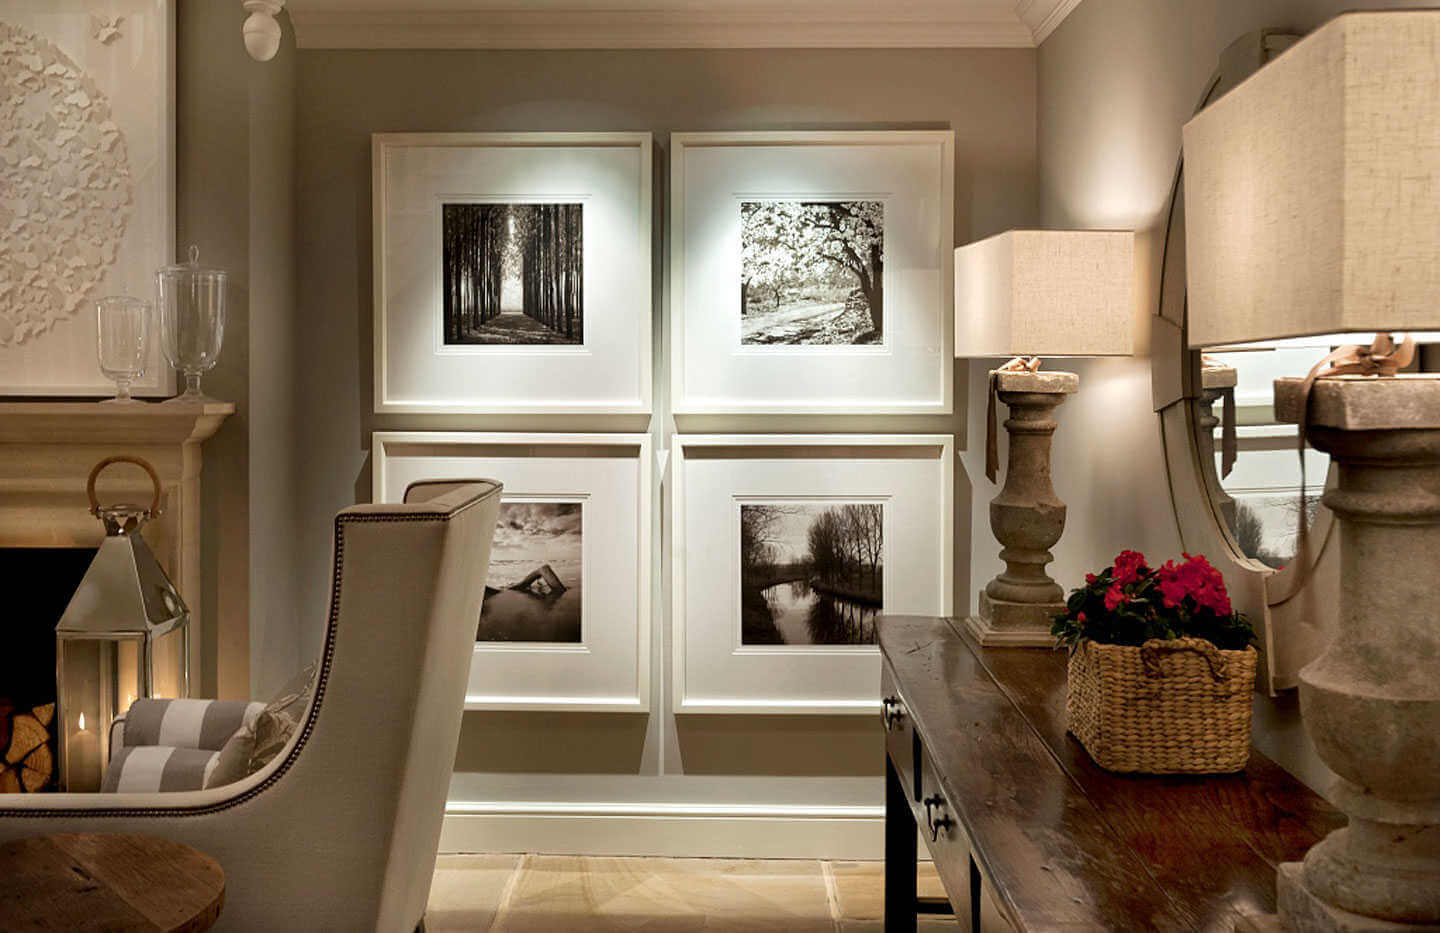 Luxury Interior Design Wall Hang with Image